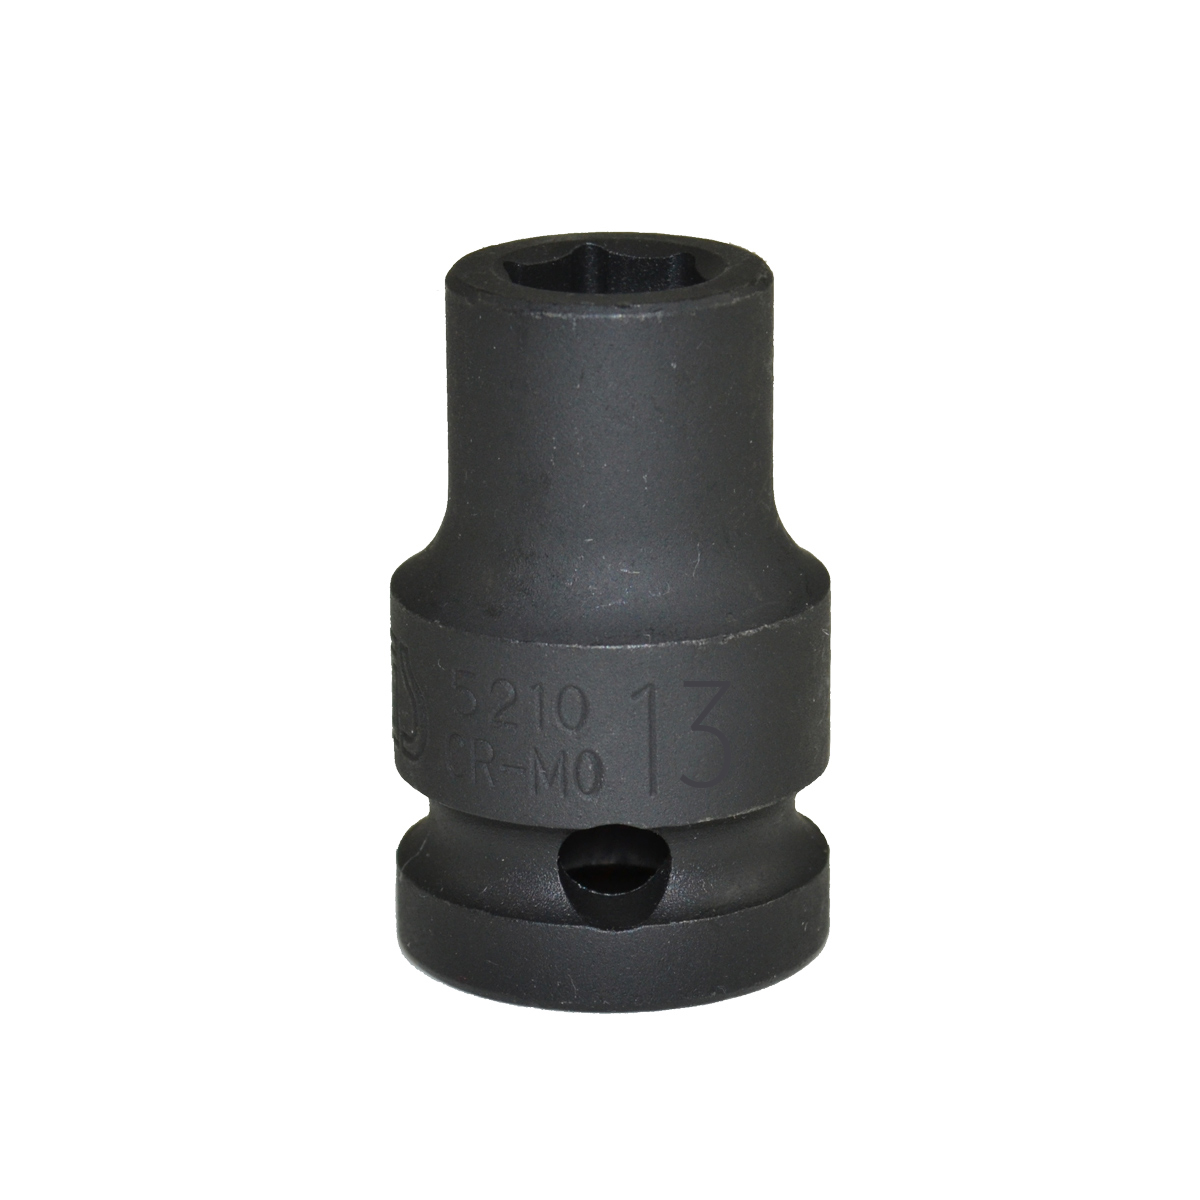 Impact wrench socket 10mm suitable for ValFix